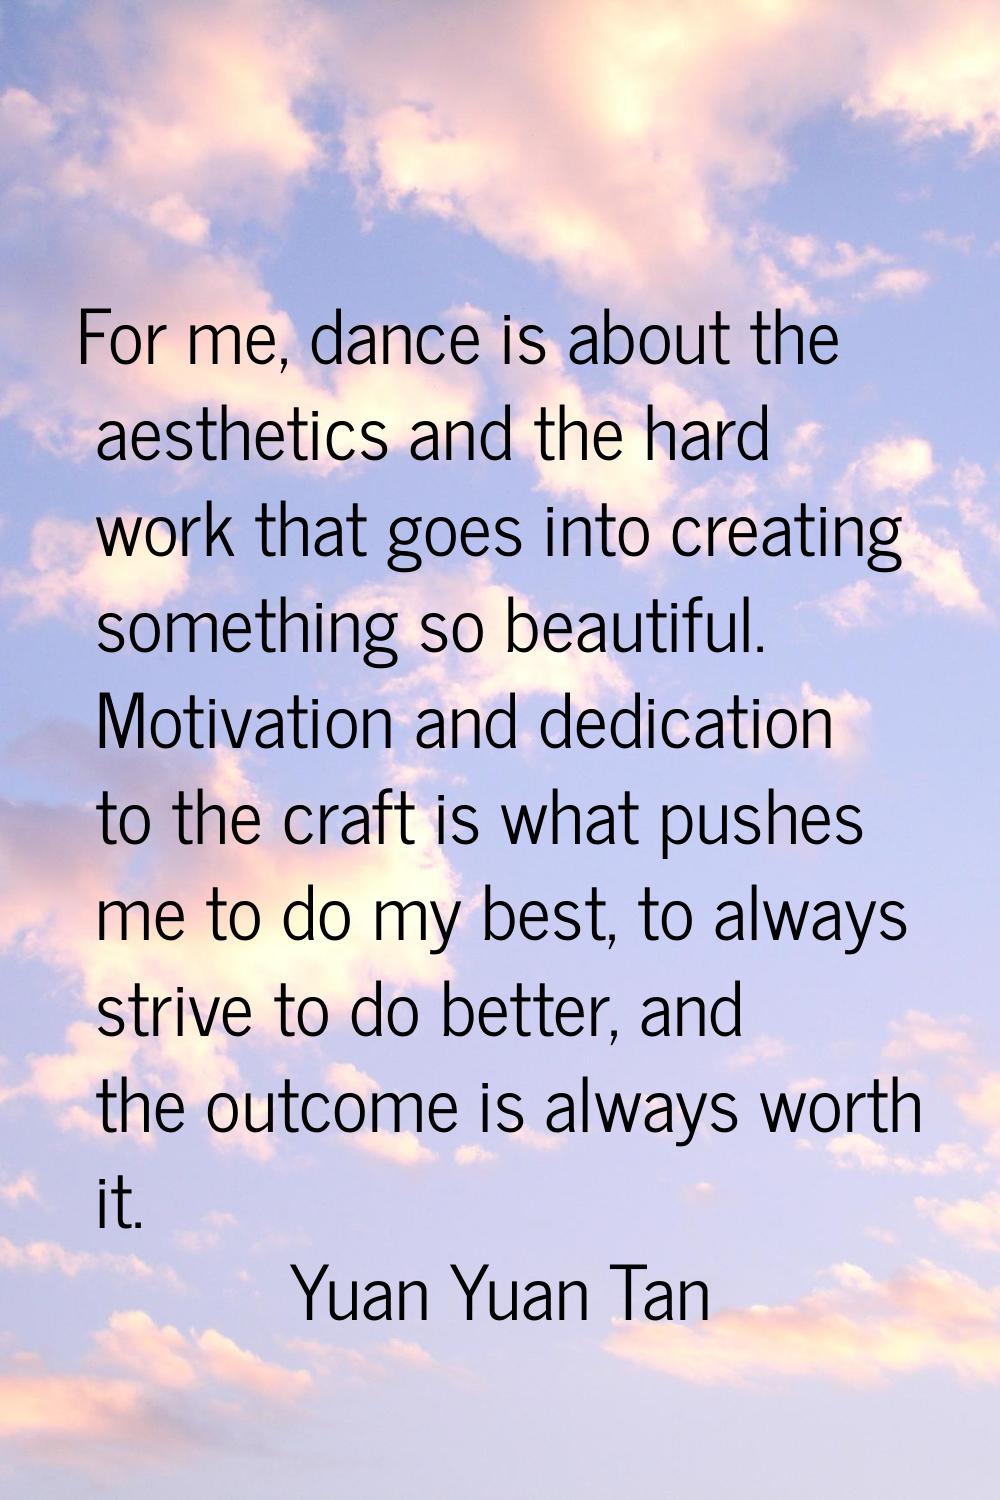 For me, dance is about the aesthetics and the hard work that goes into creating something so beauti